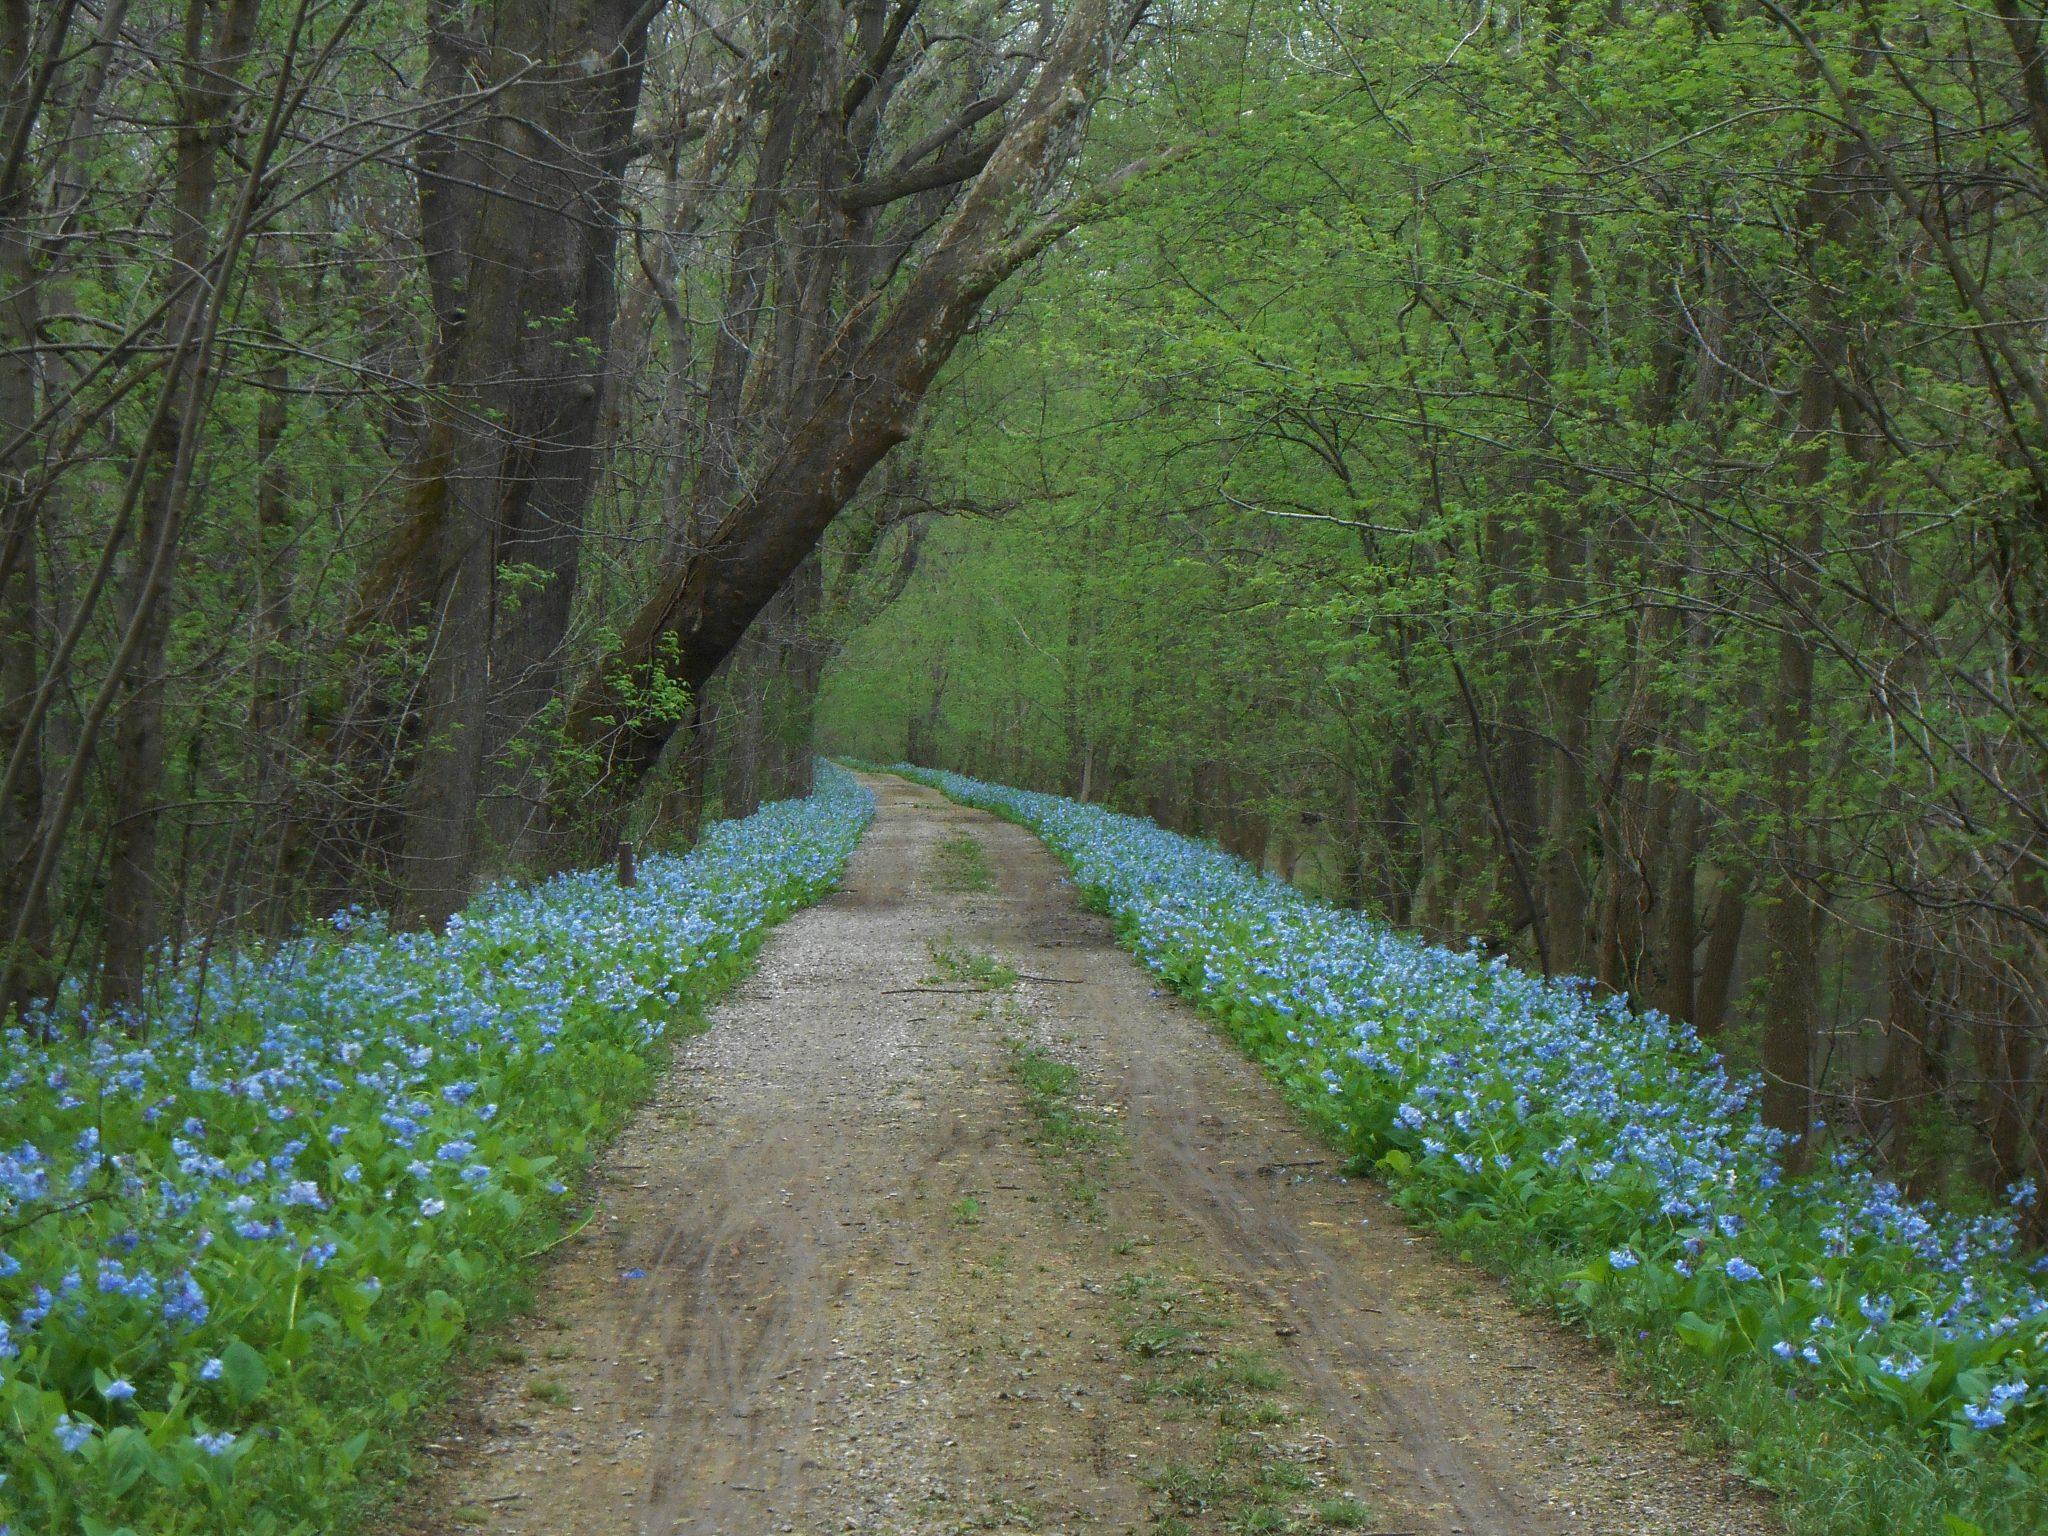 Bluebells lining the C & O Canal towpath